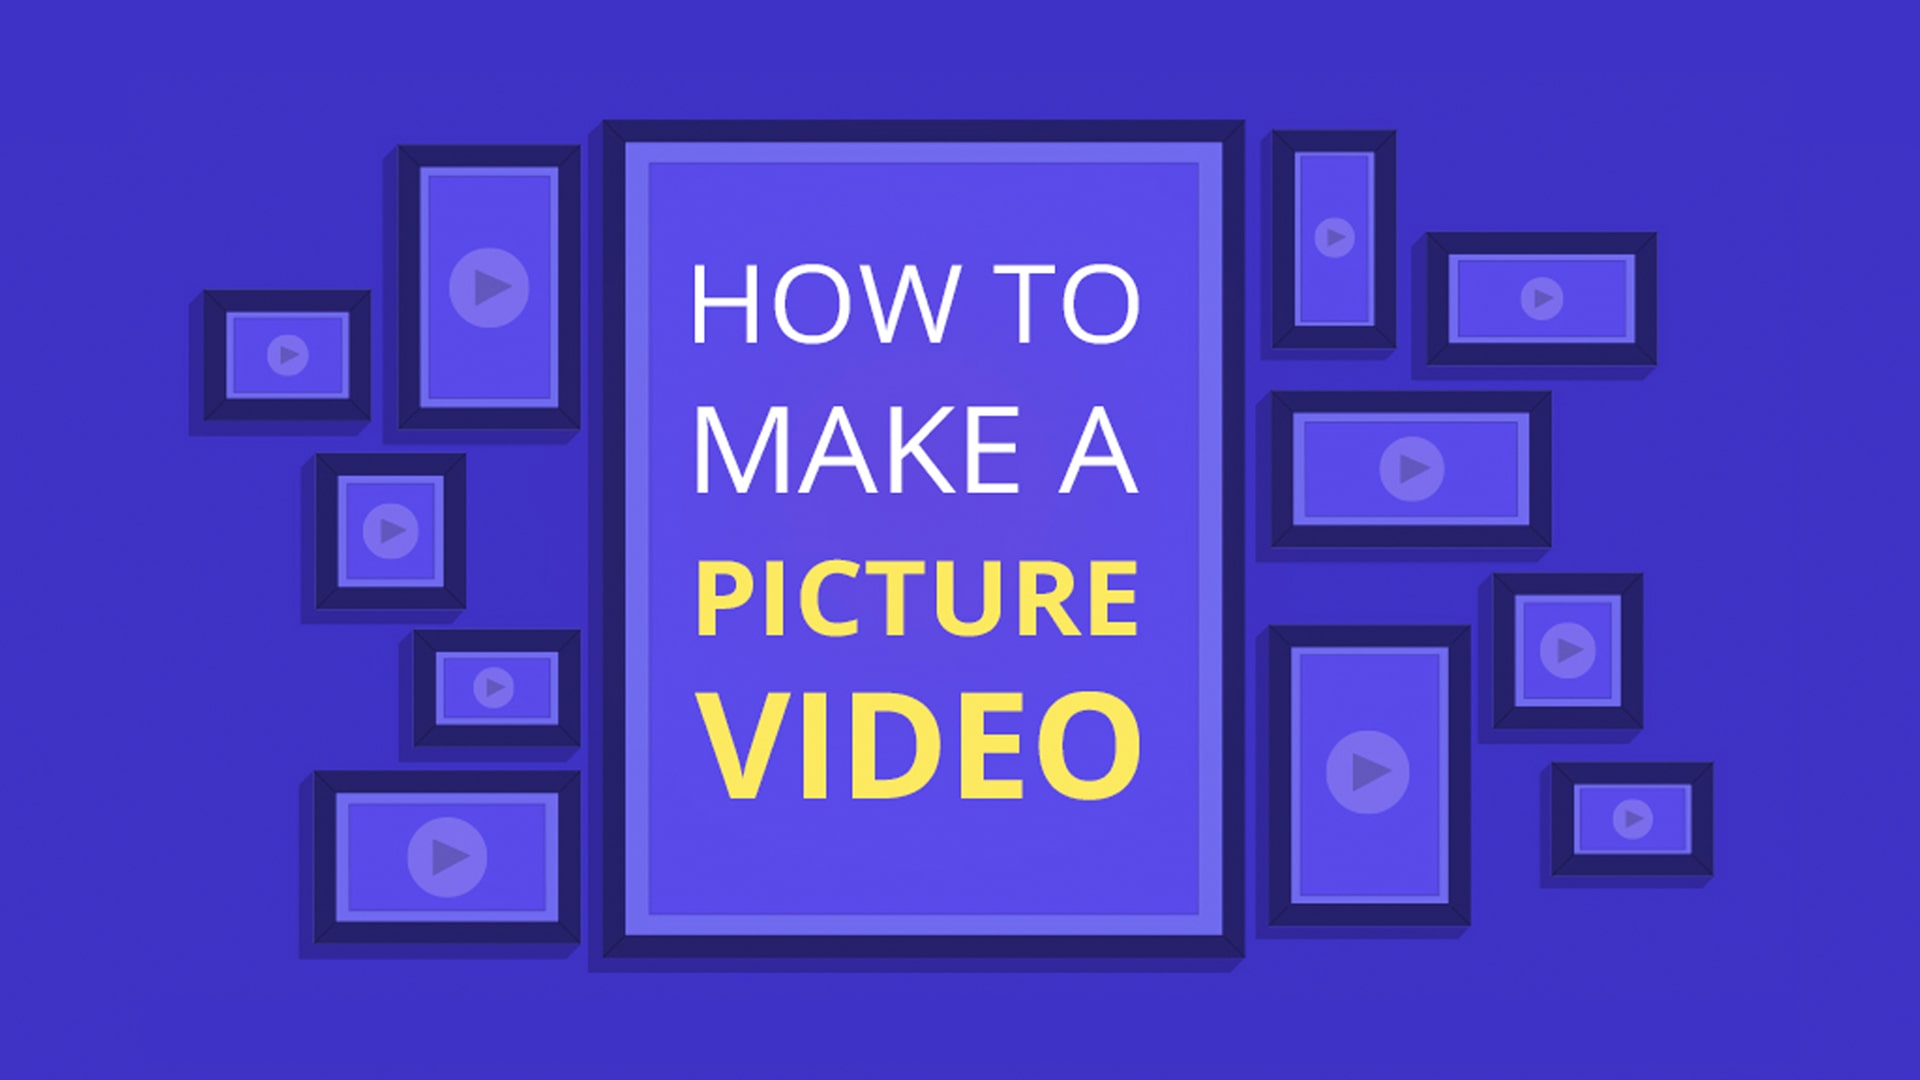 How to Make a Video with Photos and Music